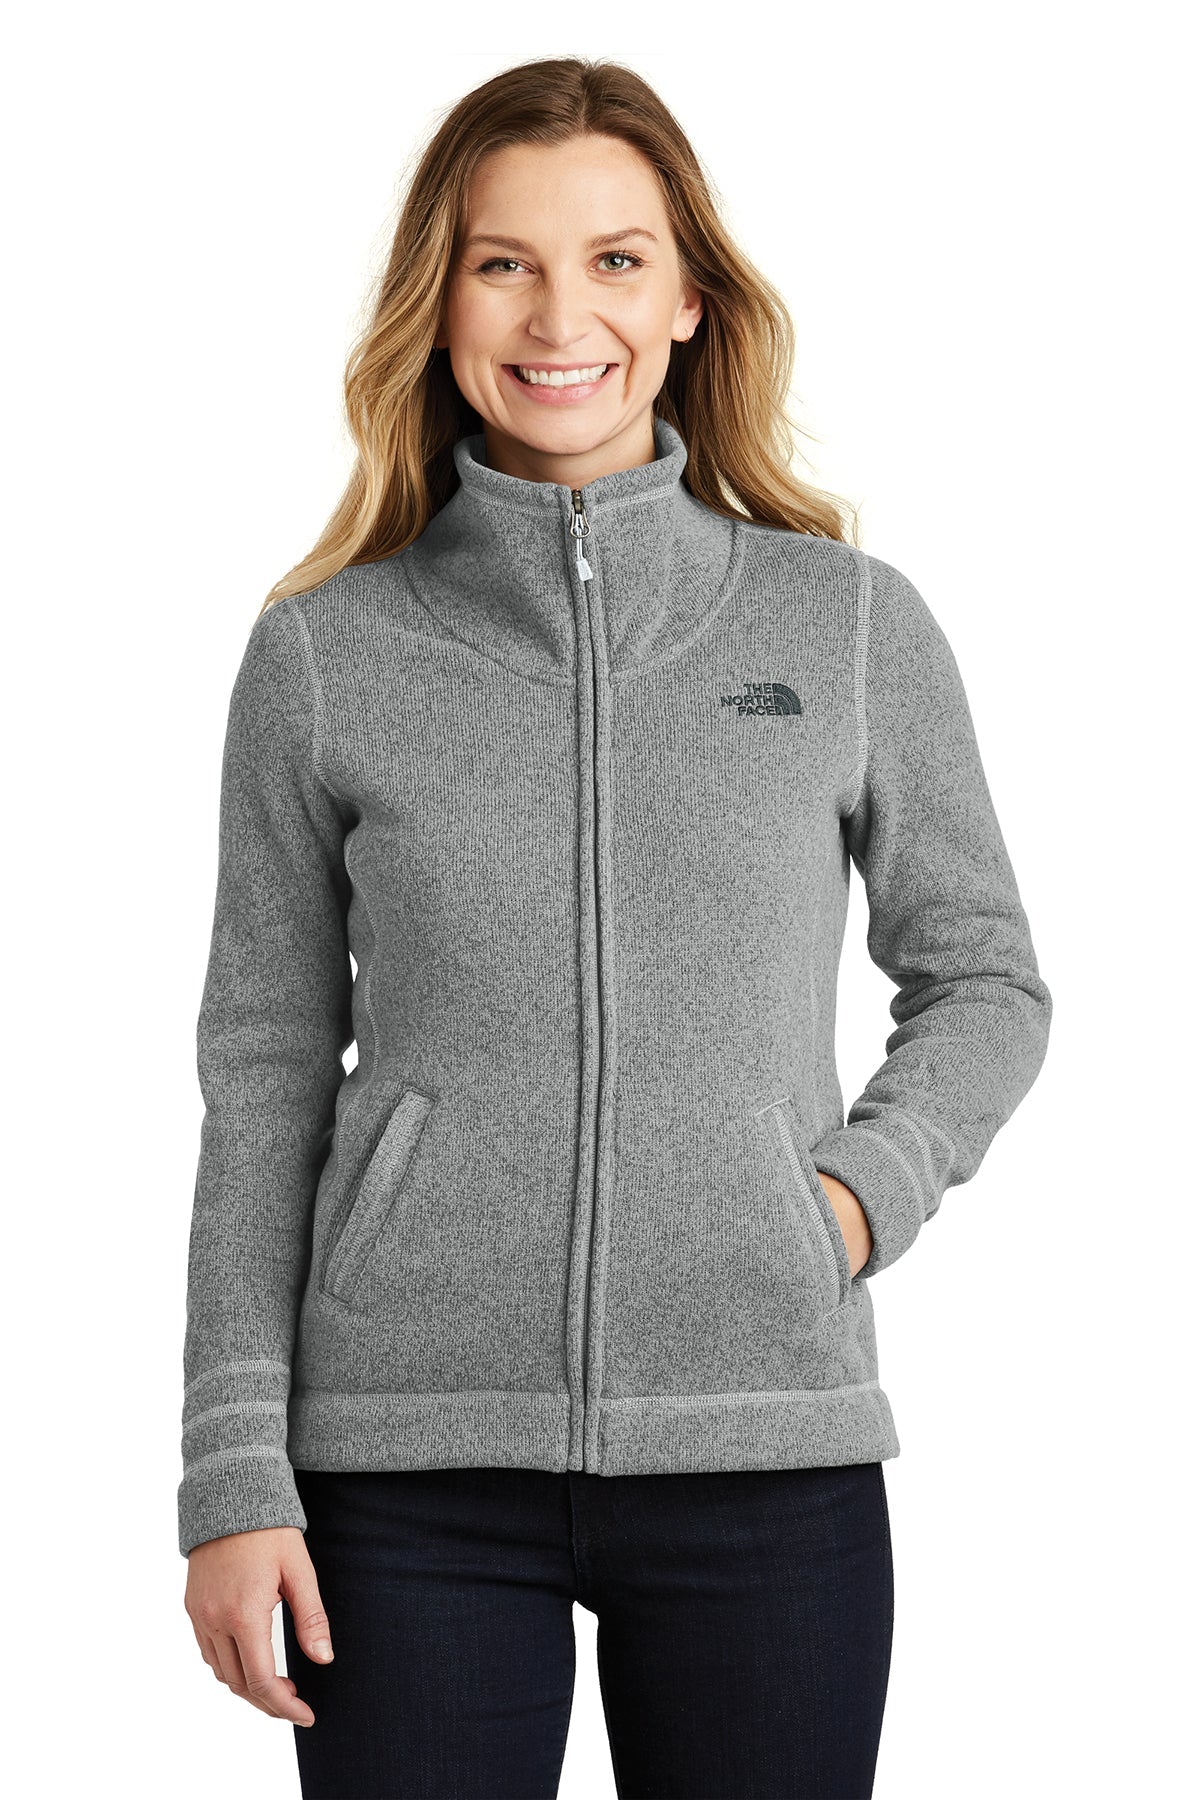 Springfield NF0A3LH8 The North Face® Ladies Sweater Fleece Jacket